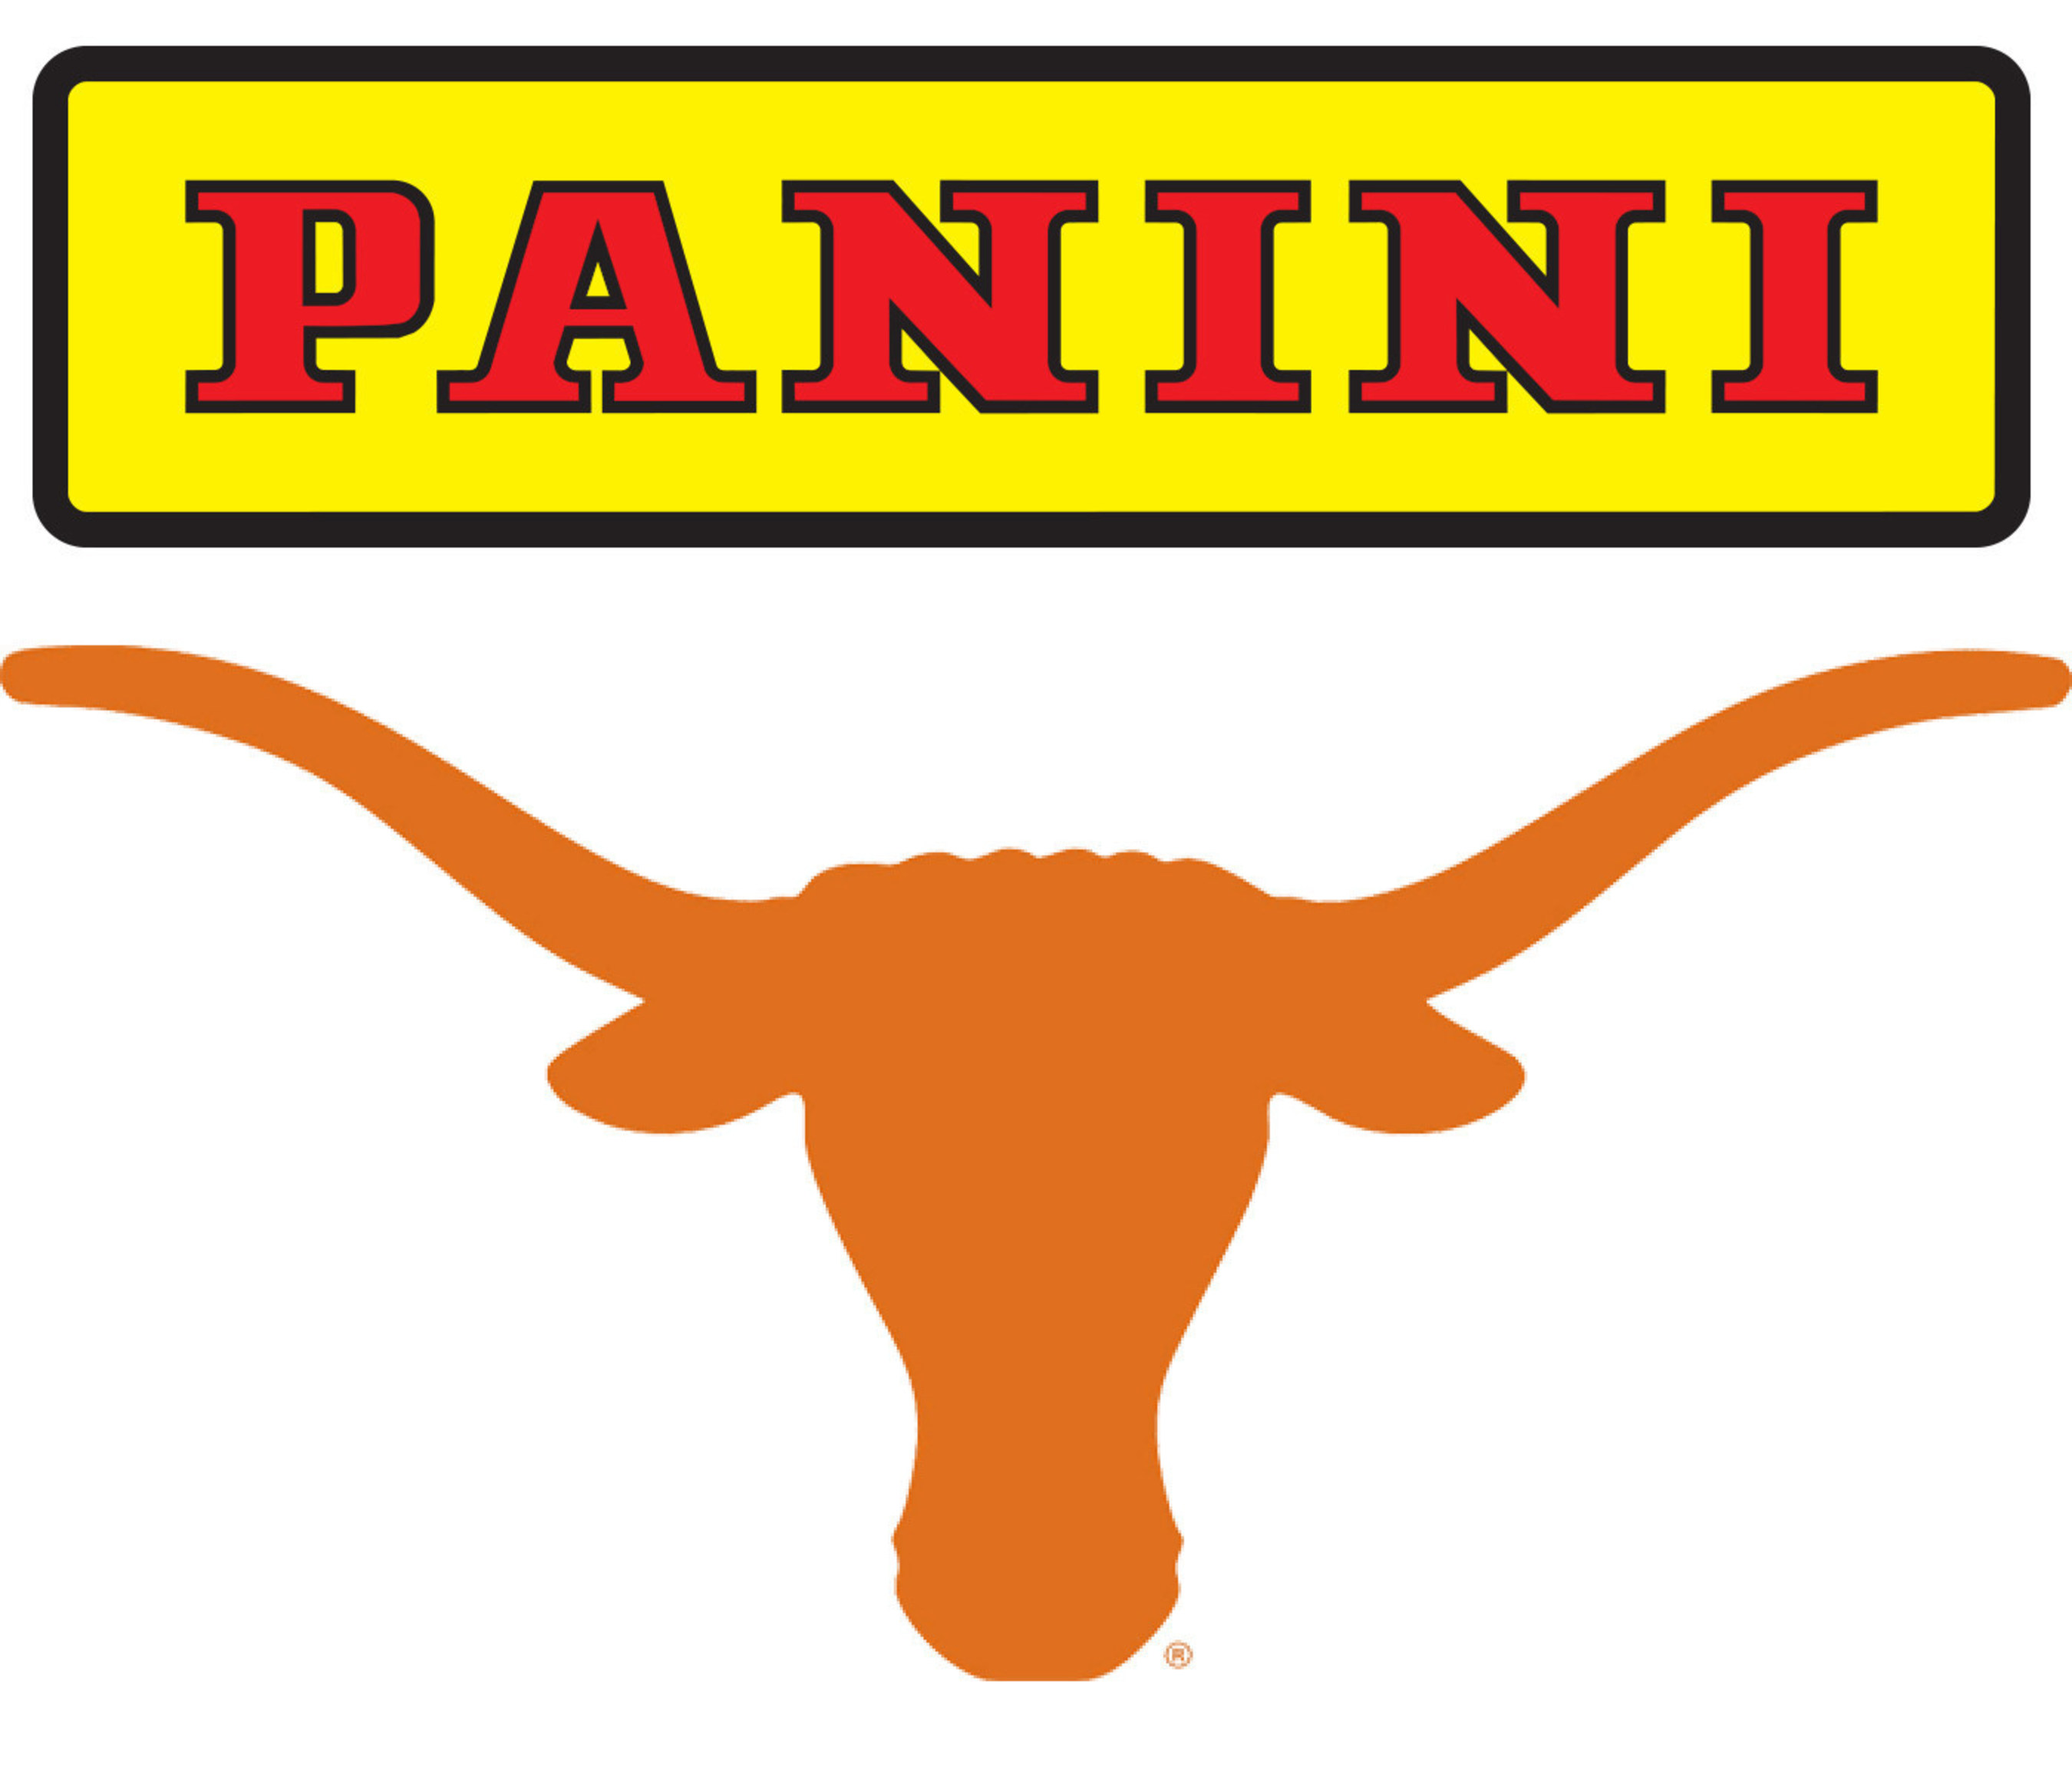 HOOK 'EM: PANINI AMERICA REACHES EXCLUSIVE MULTI-YEAR TRADING CARD AGREEMENT WITH THE UNIVERSITY OF TEXAS